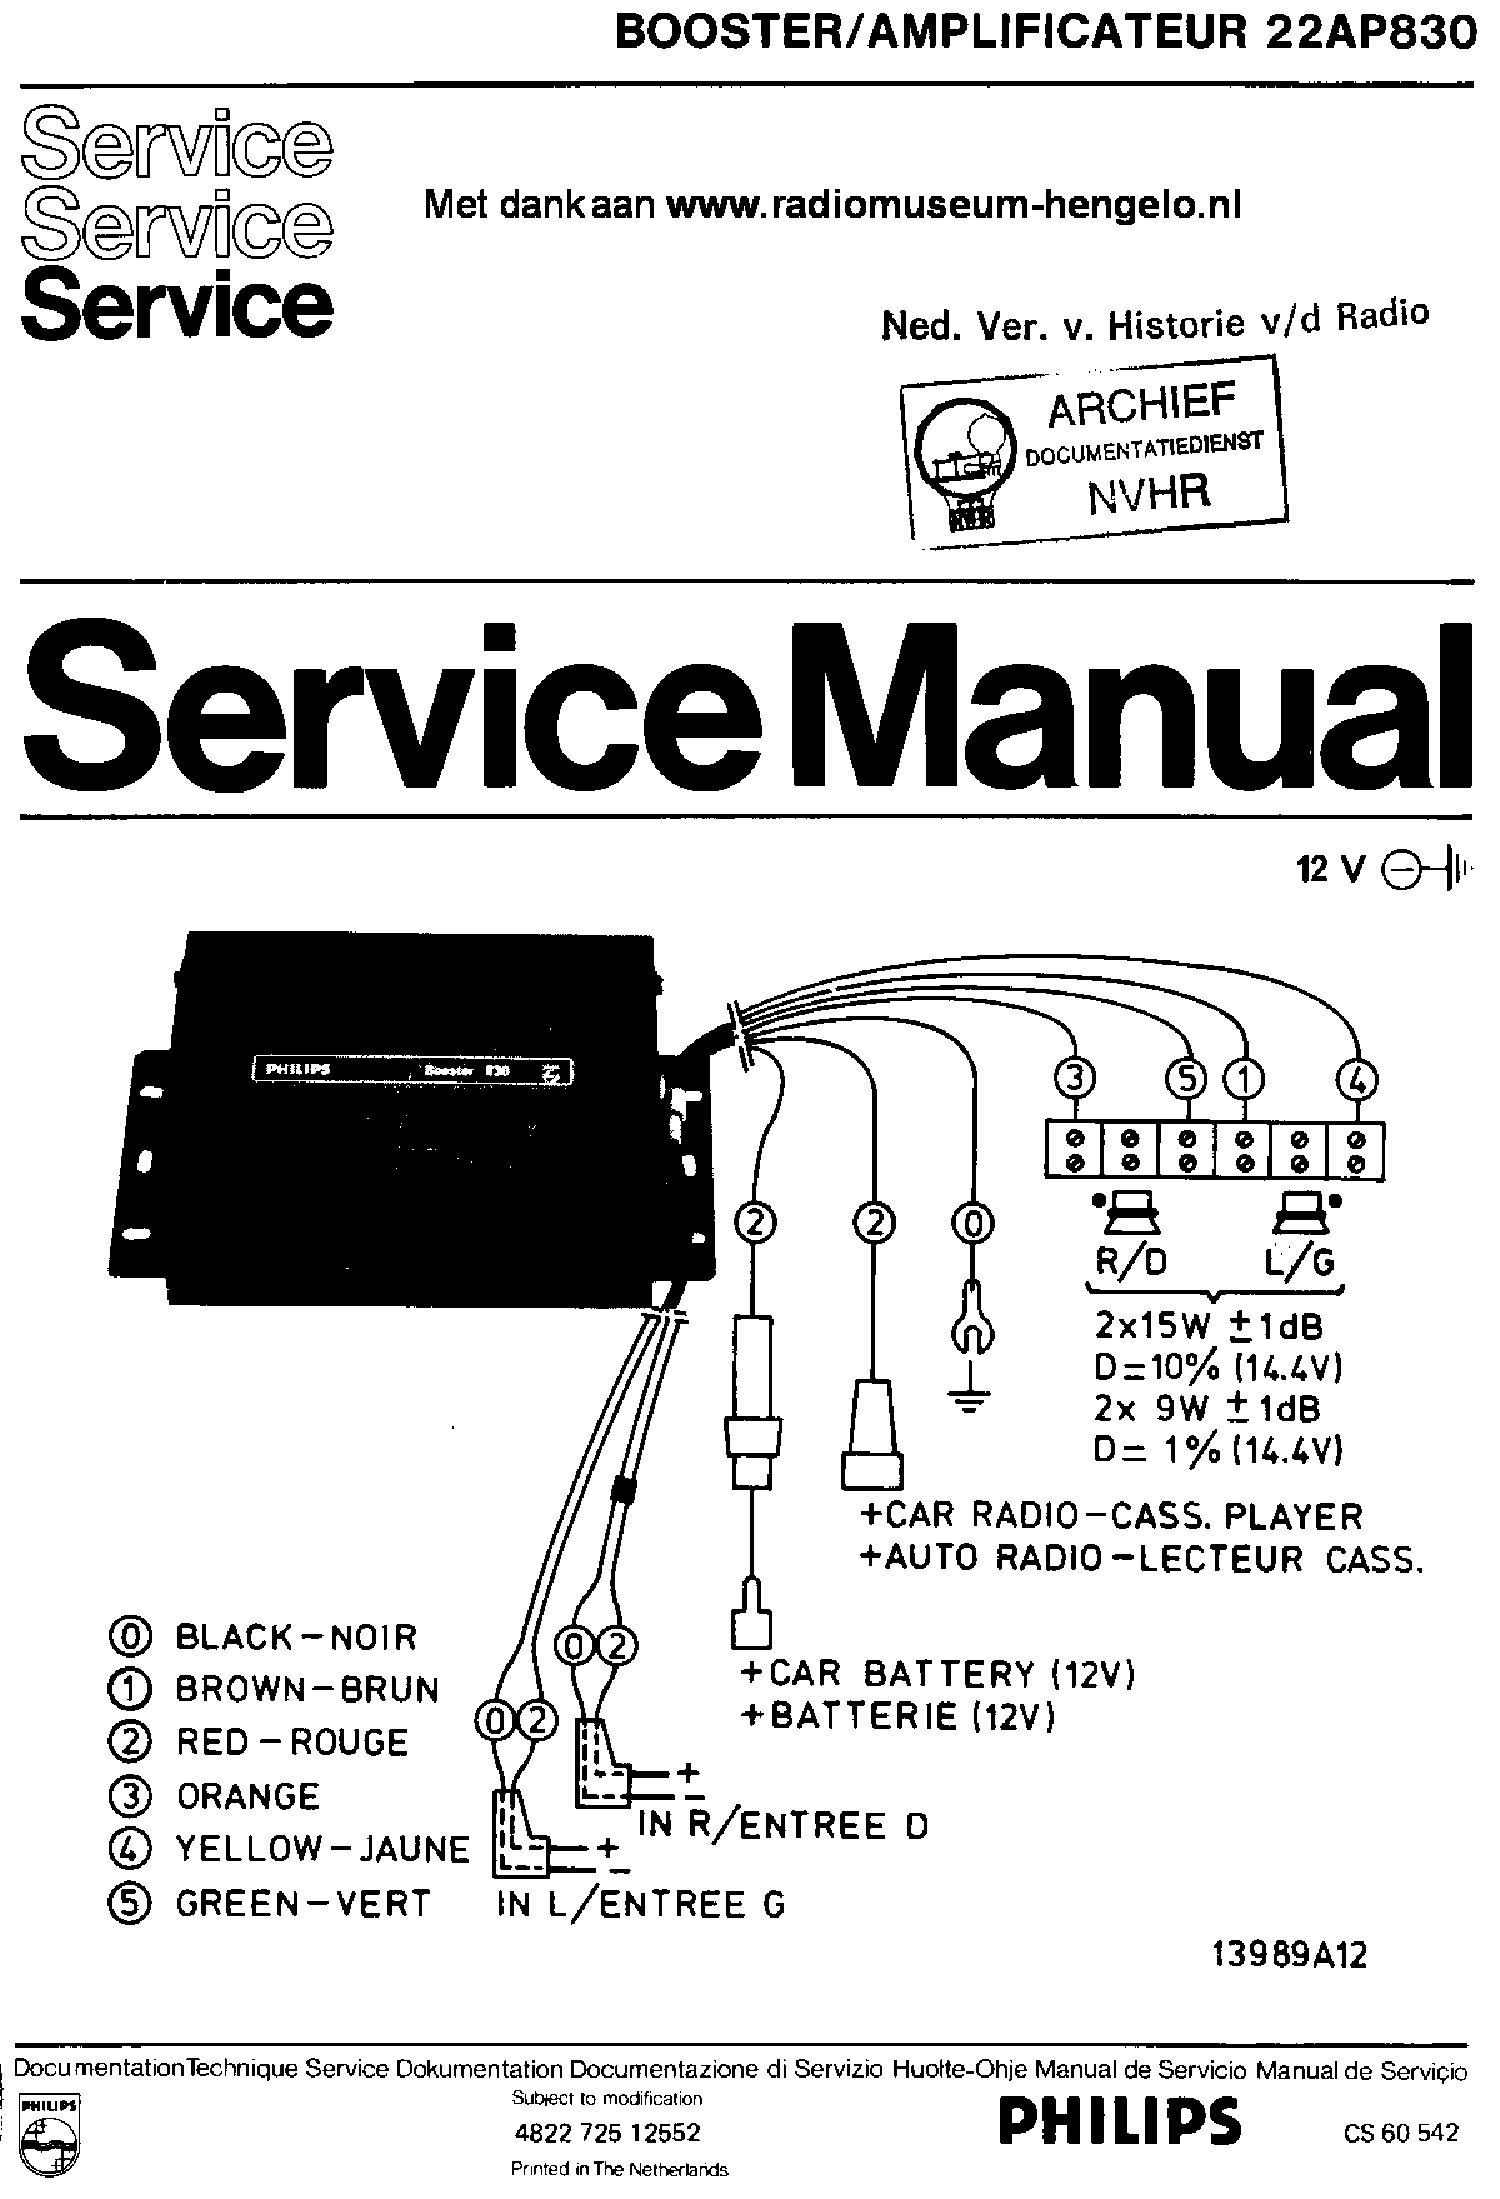 PHILIPS 22AP830 HIFI BOOSTER SM service manual (1st page)